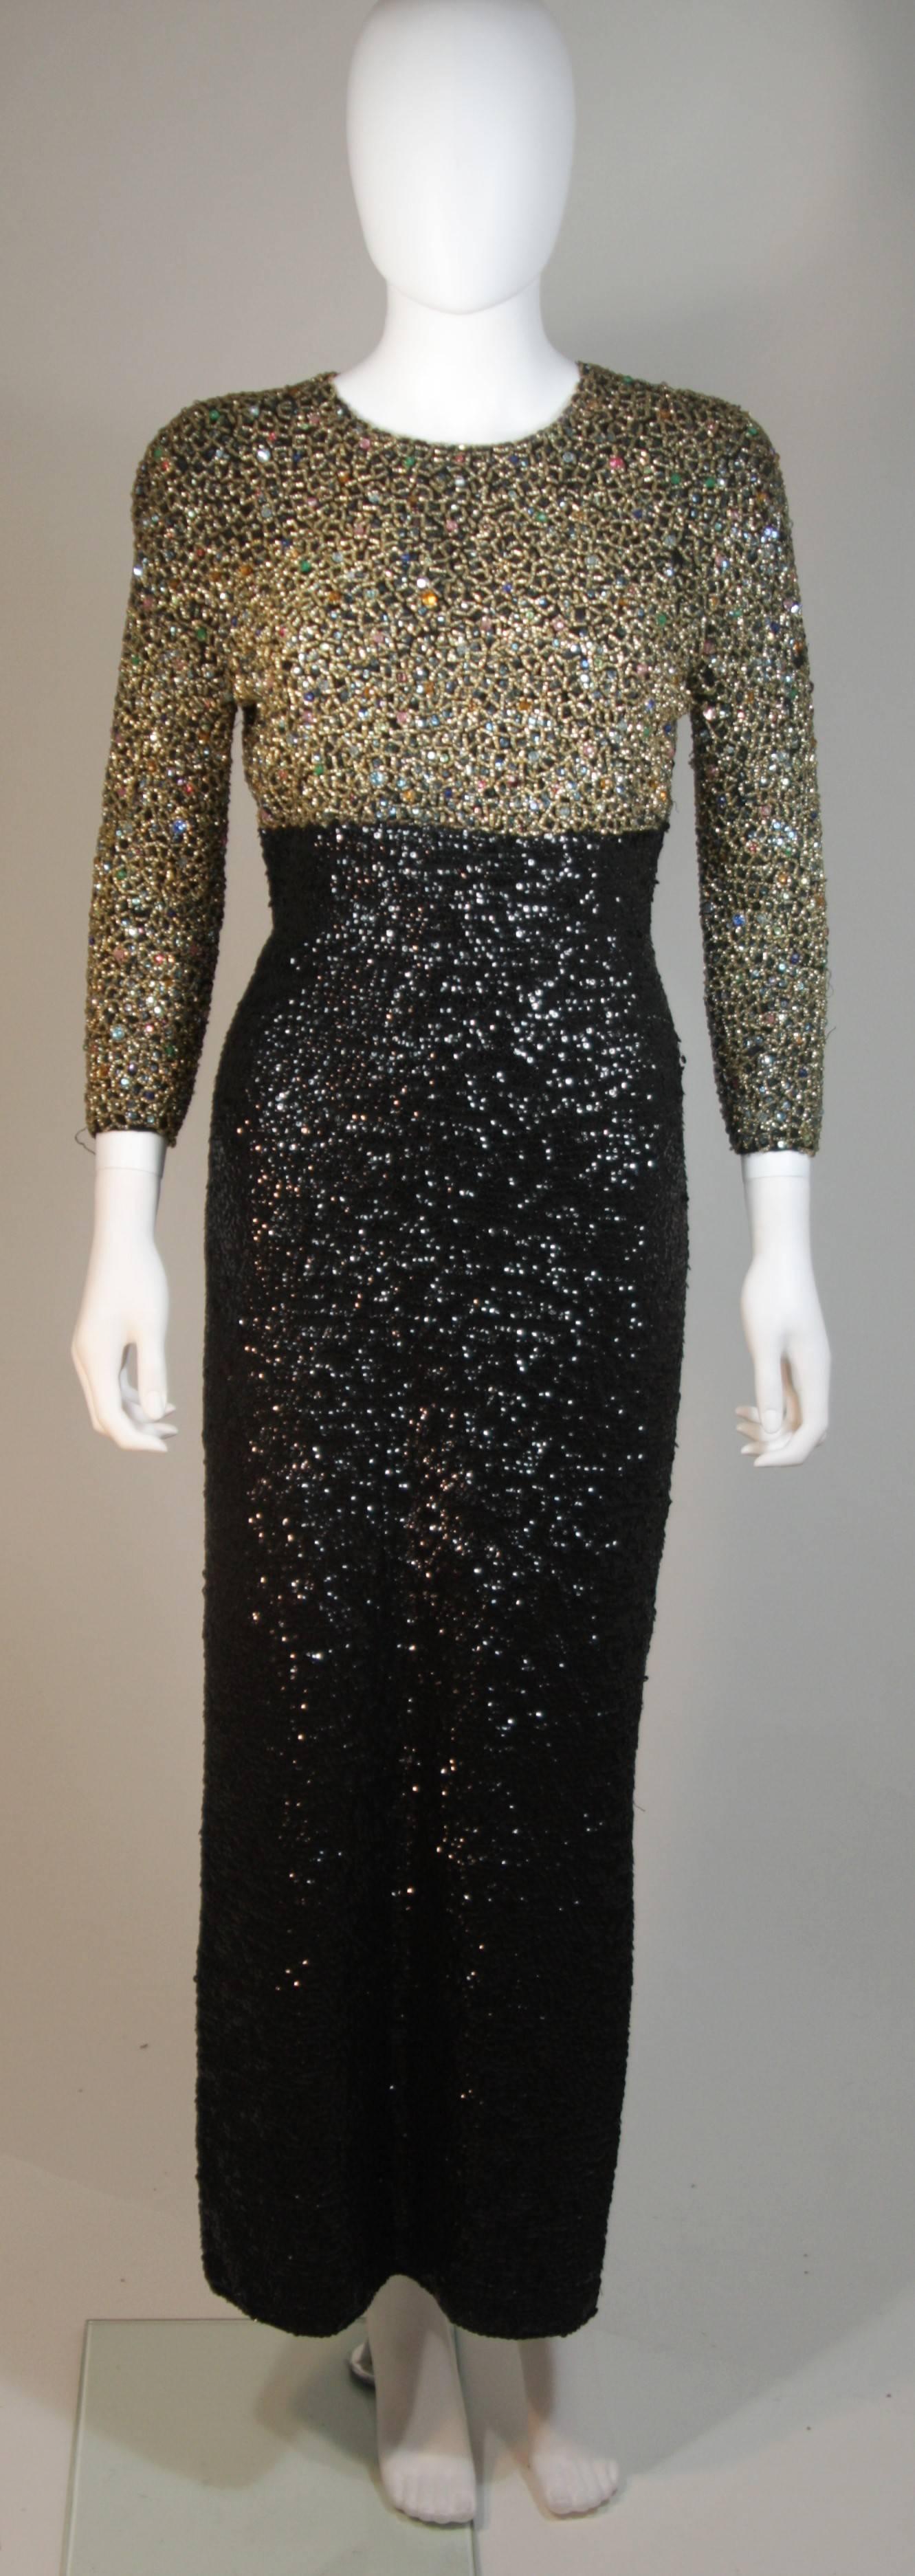 This Gene Shelly's  gown is composed of a black stretch knit which is heavily embellished. Features a beaded bodice and sequin skirt. There is a center back zipper closure. In excellent condition. Made in Hong Kong.

  **Please cross-reference